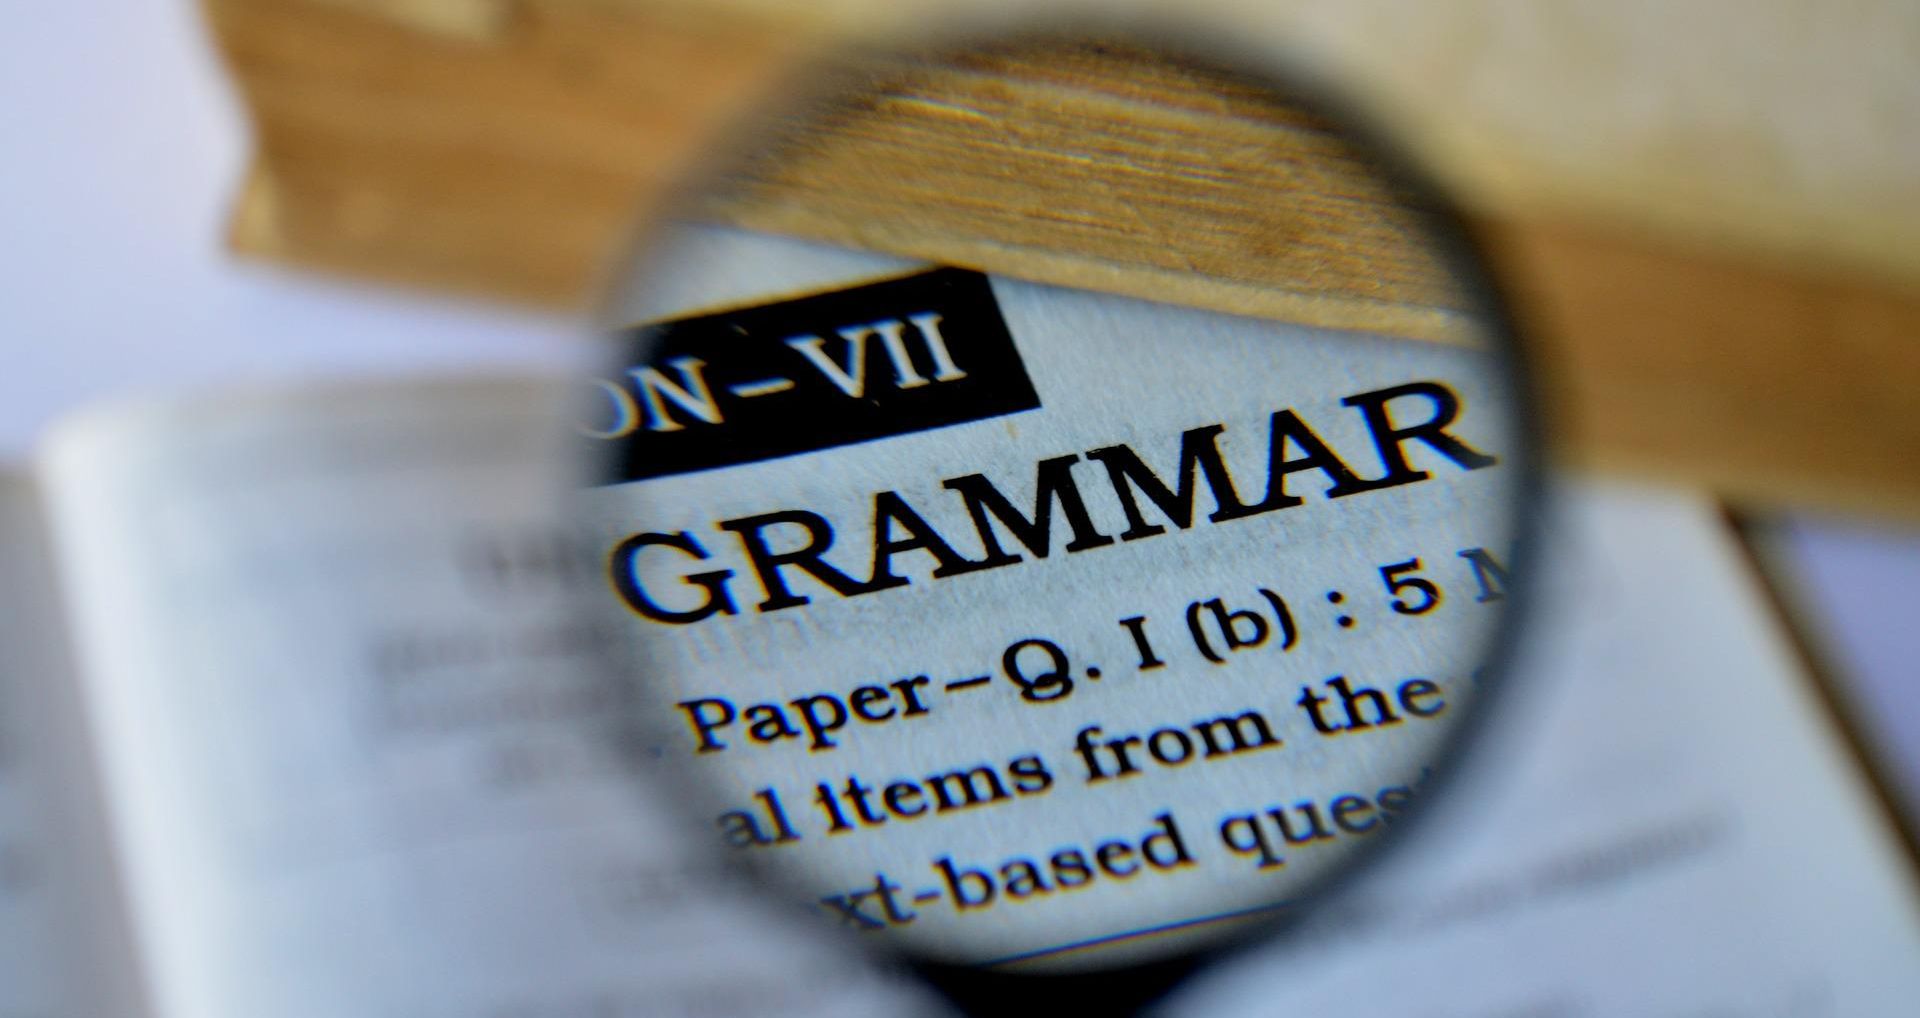 magnifying glass showing word "grammar" on paper